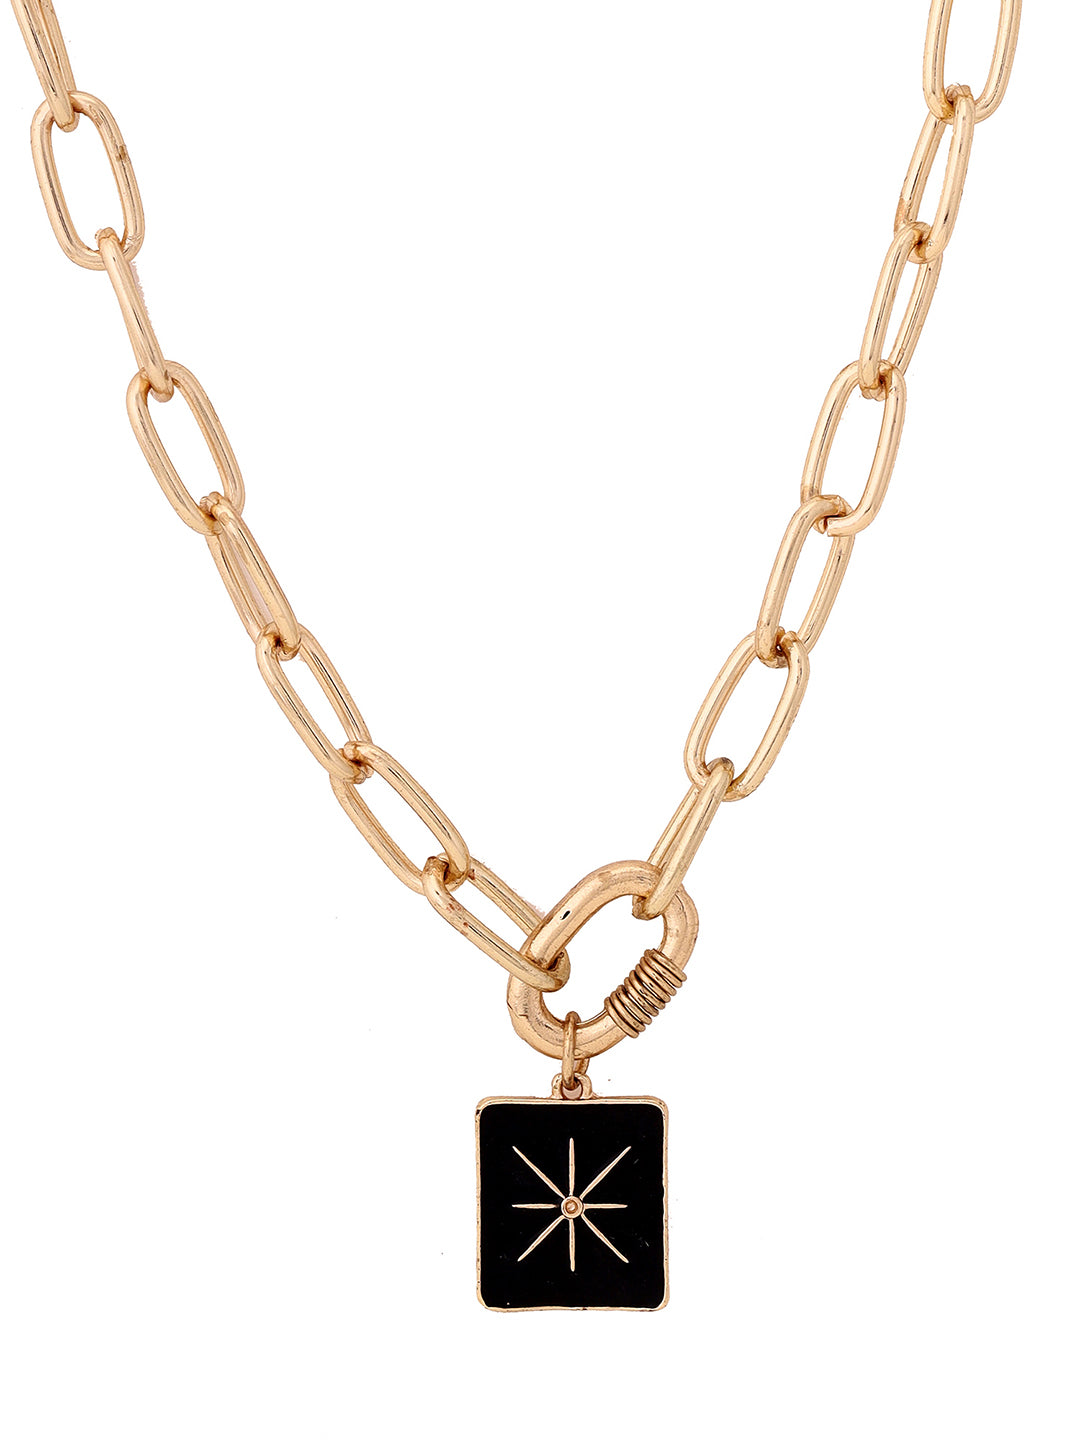 Priyaasi Star Pendant Linked Chained Necklace